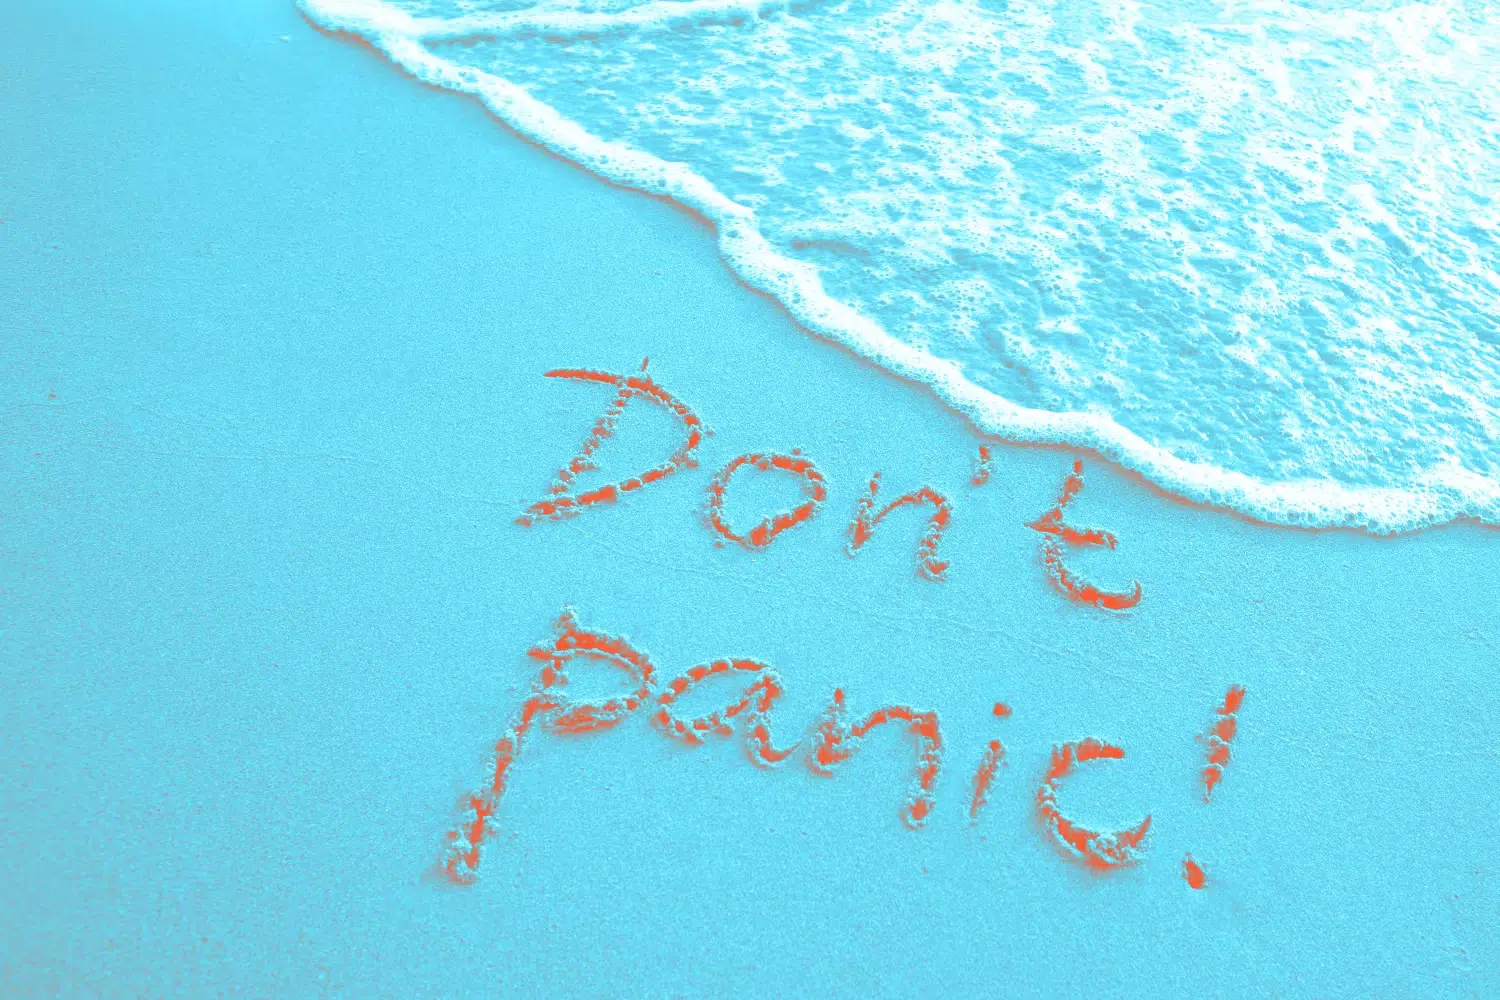 Spelling in sand "Don't panic"